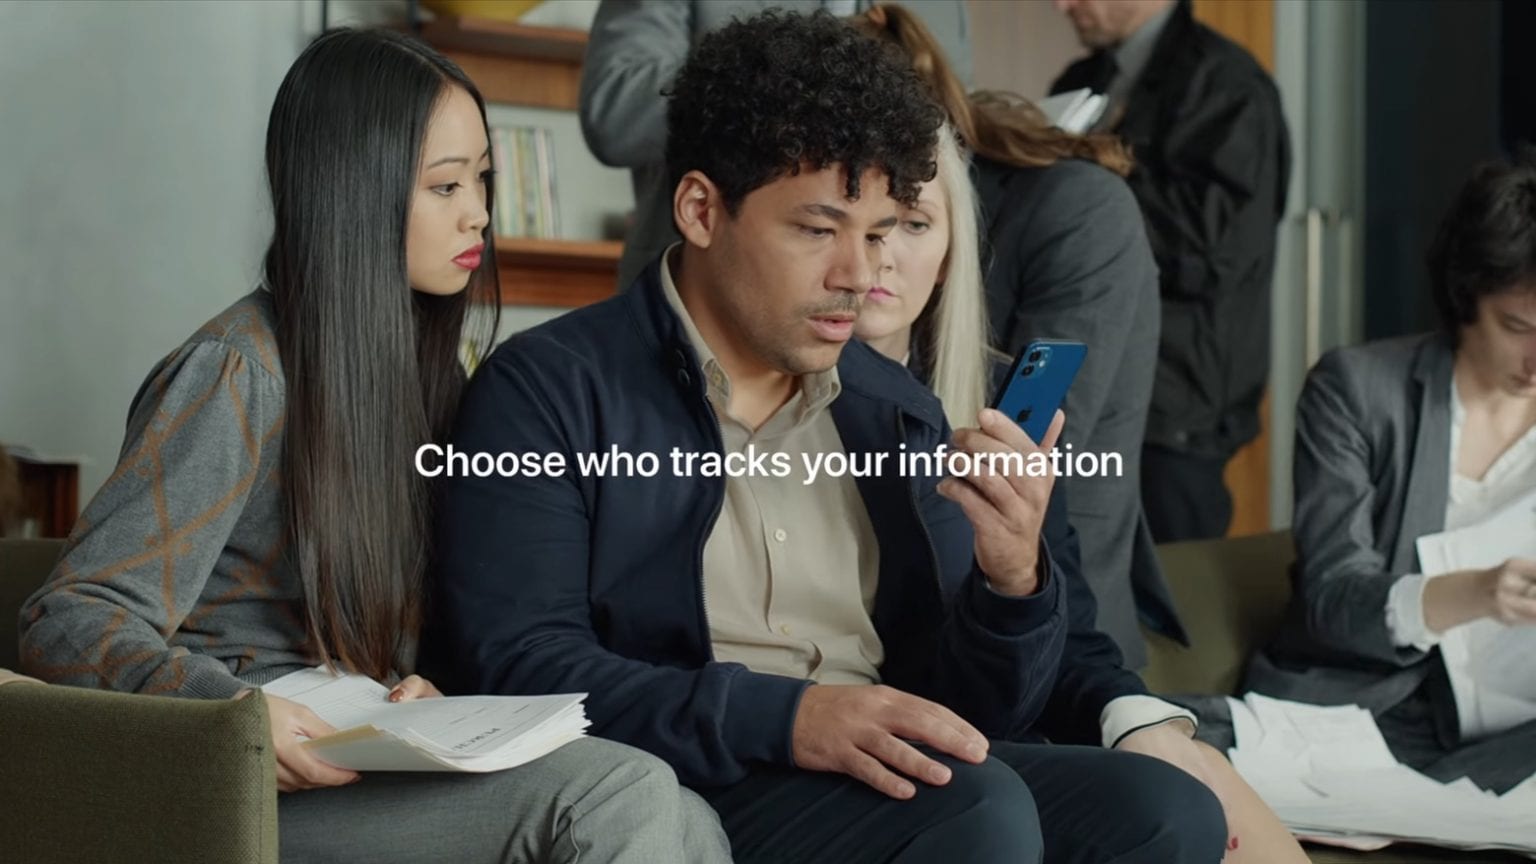 Apple takes funny look at apps tracking users in new video